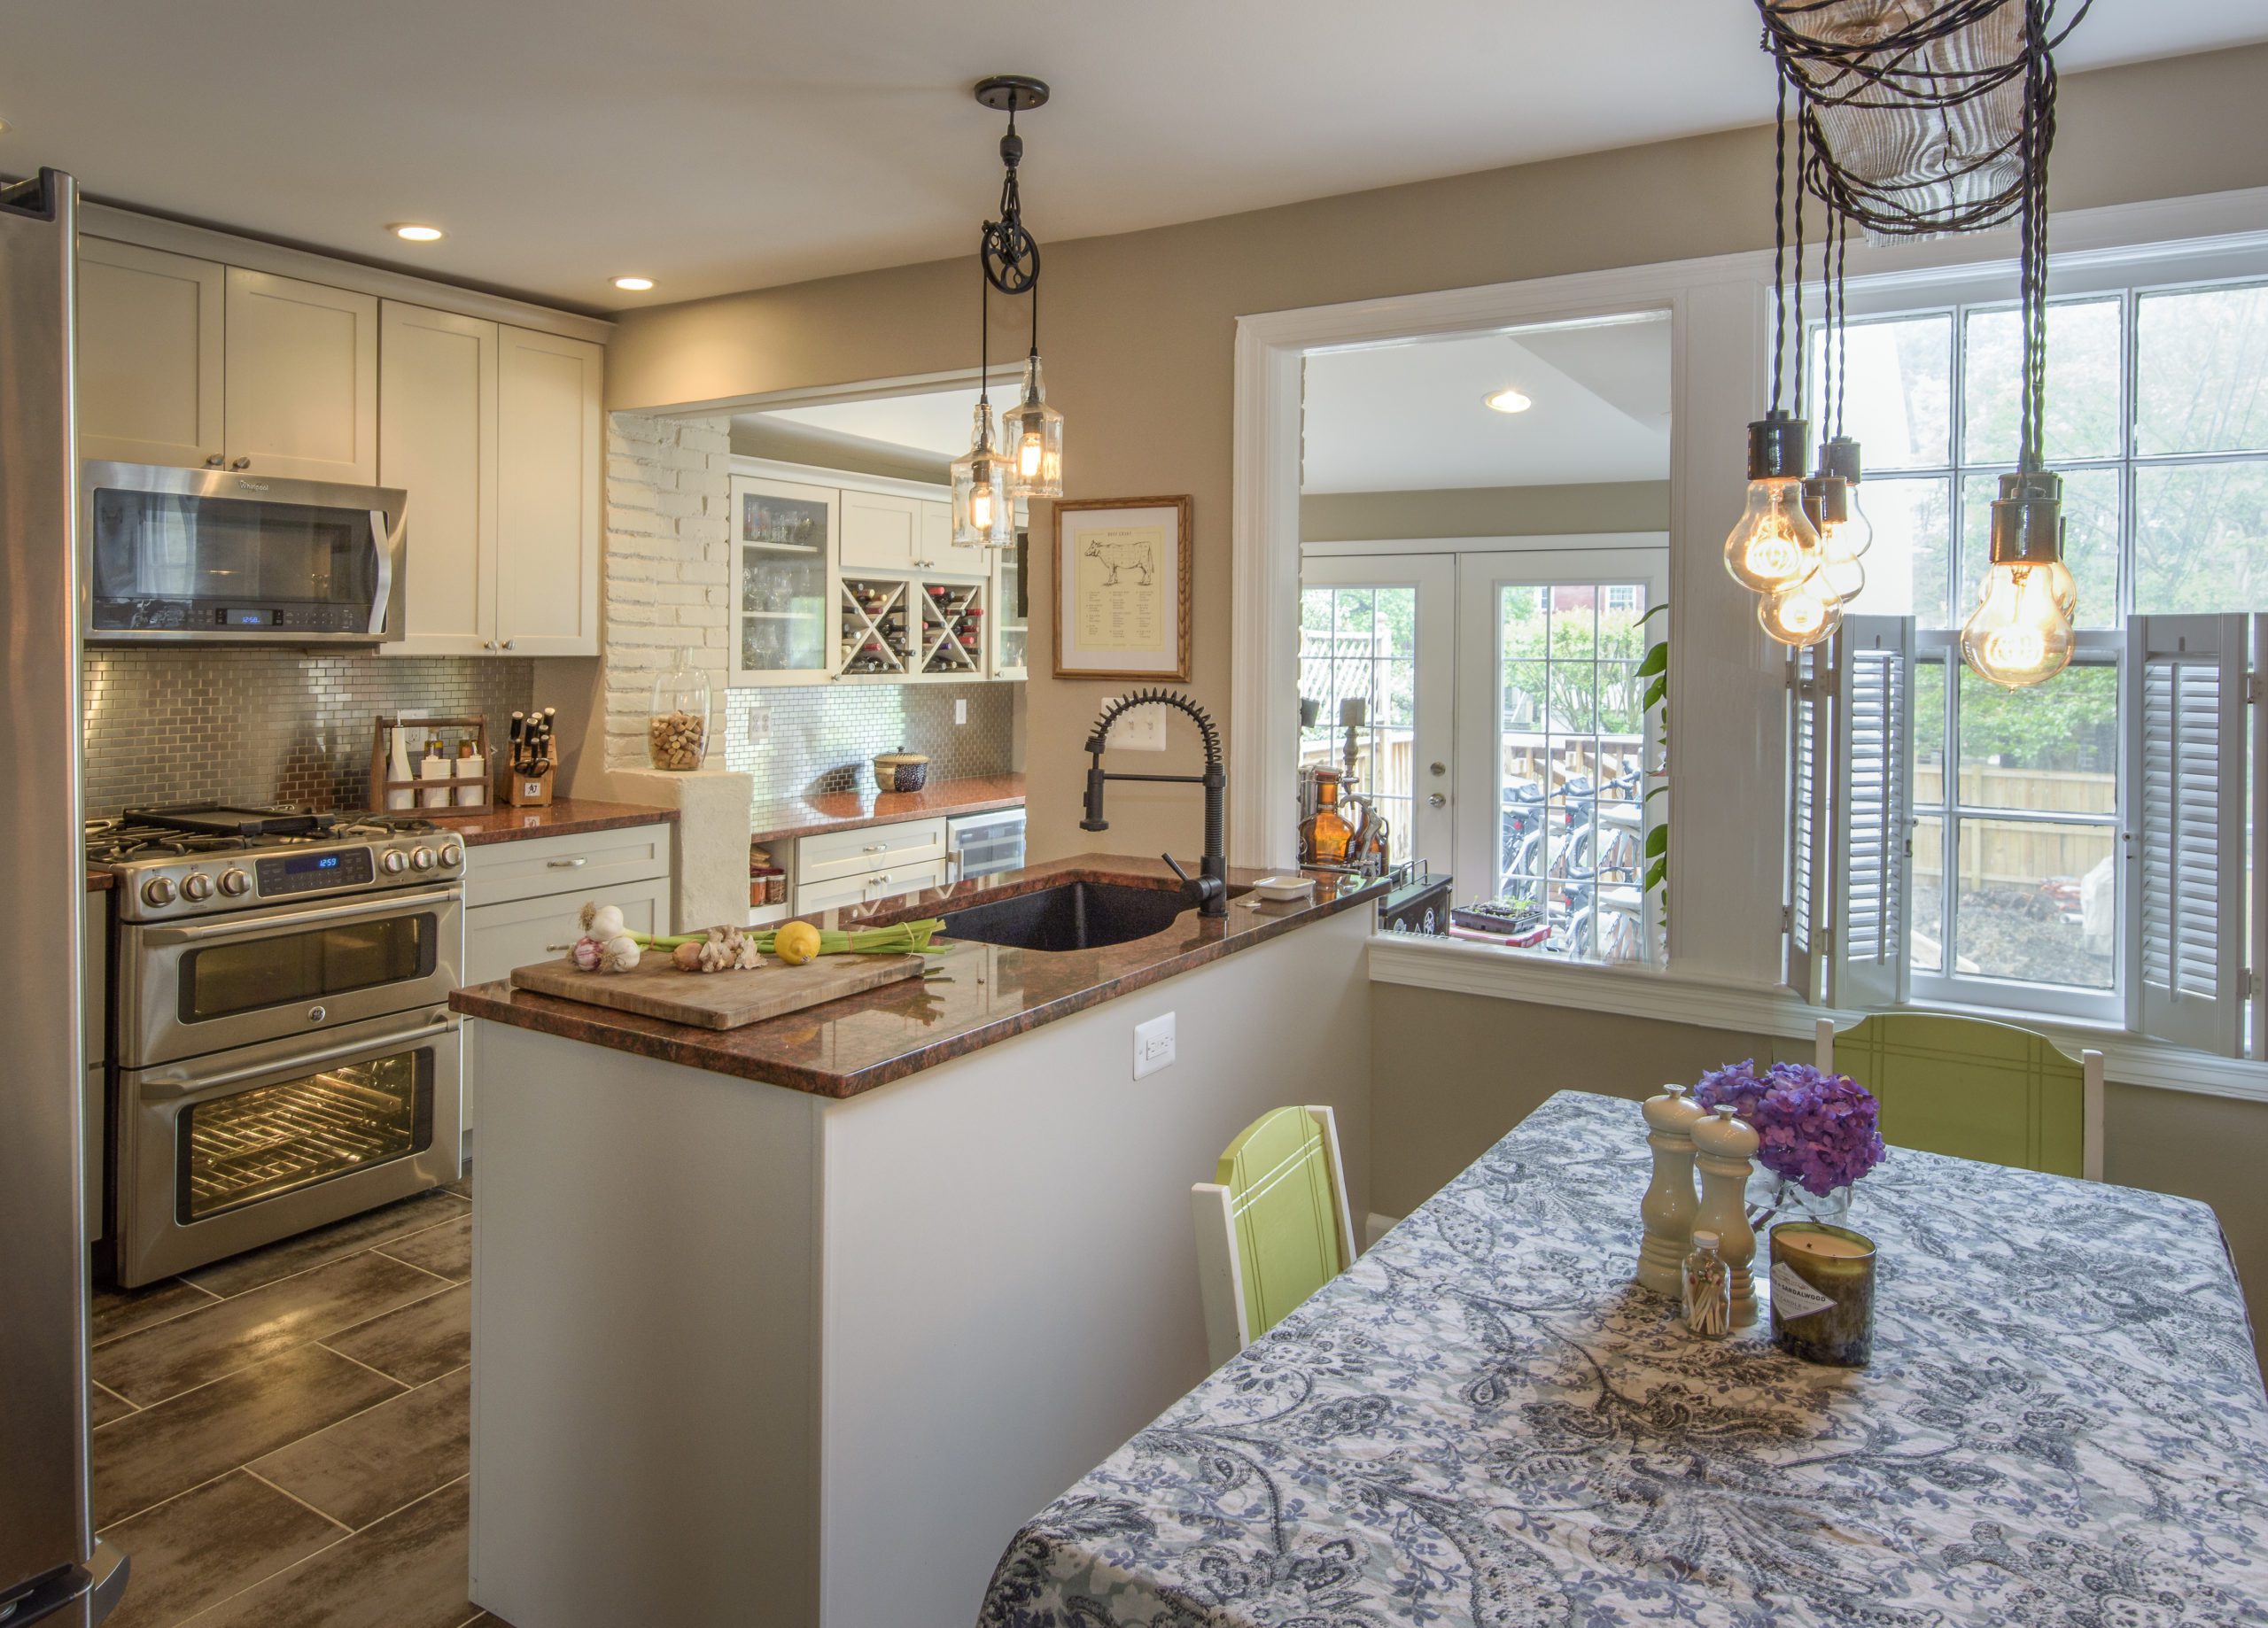 Top 5 Things to Consider Before You Redesign Your Kitchen